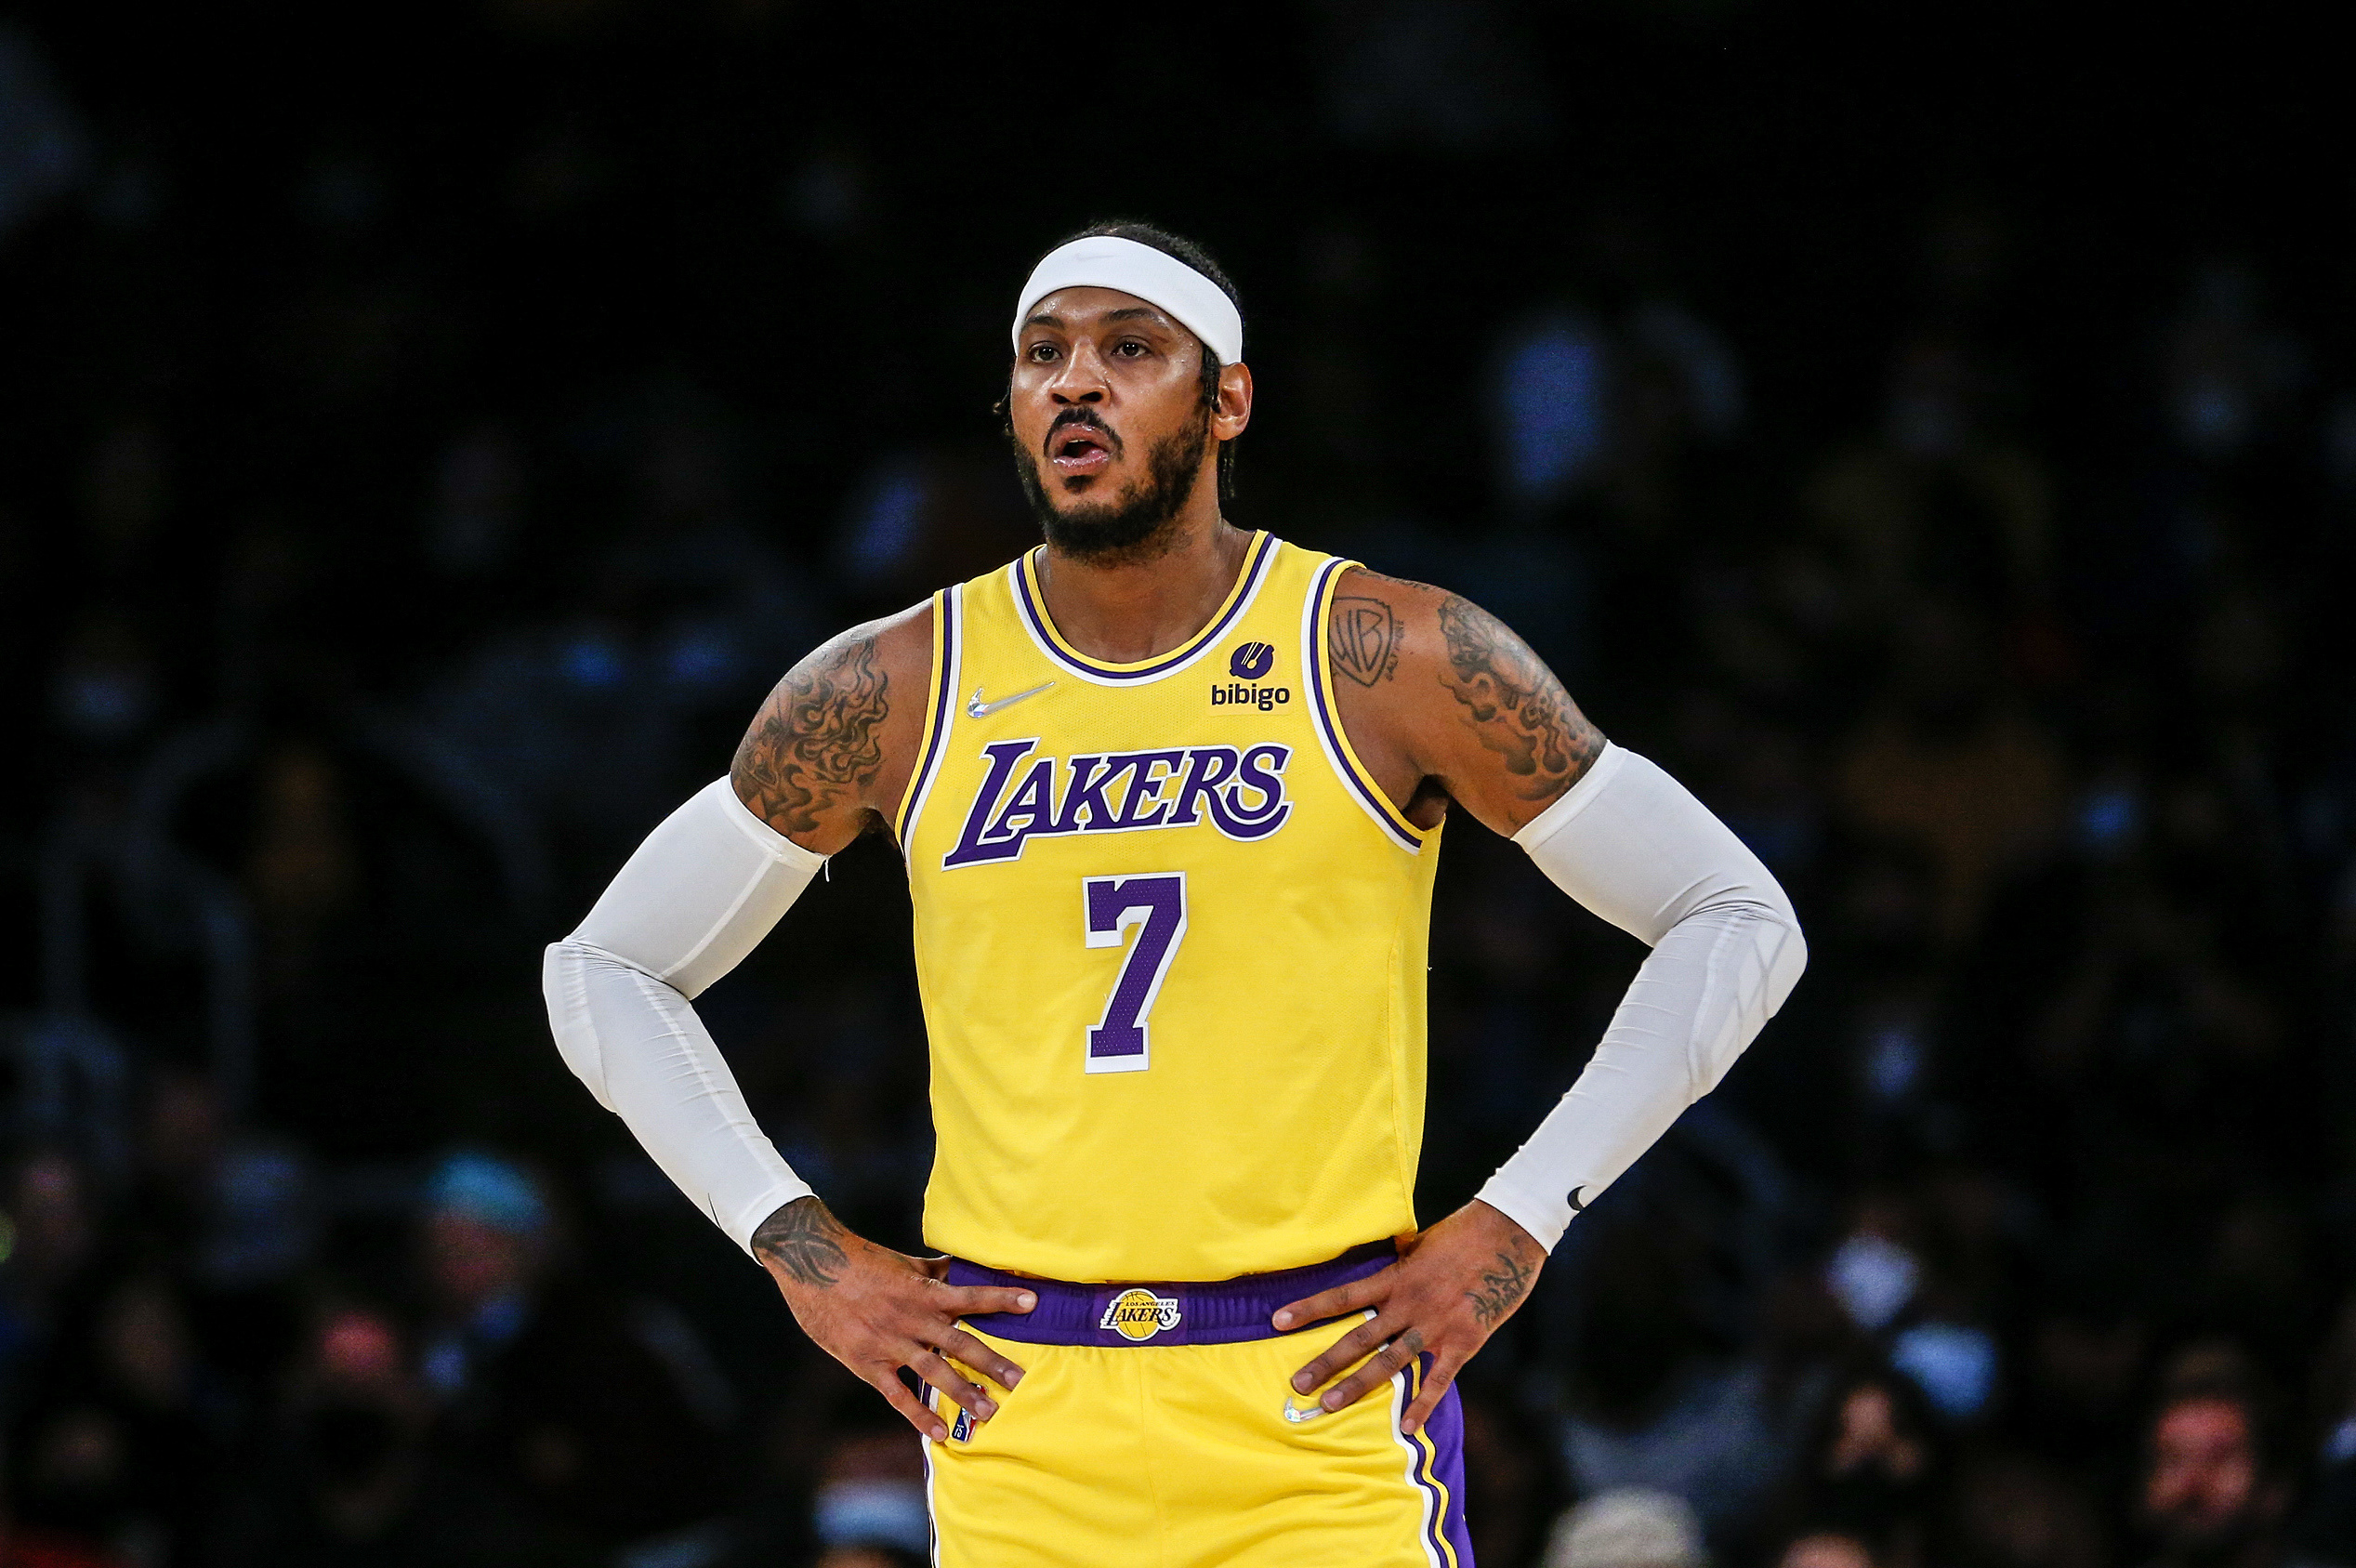 lakers jersey carmelo